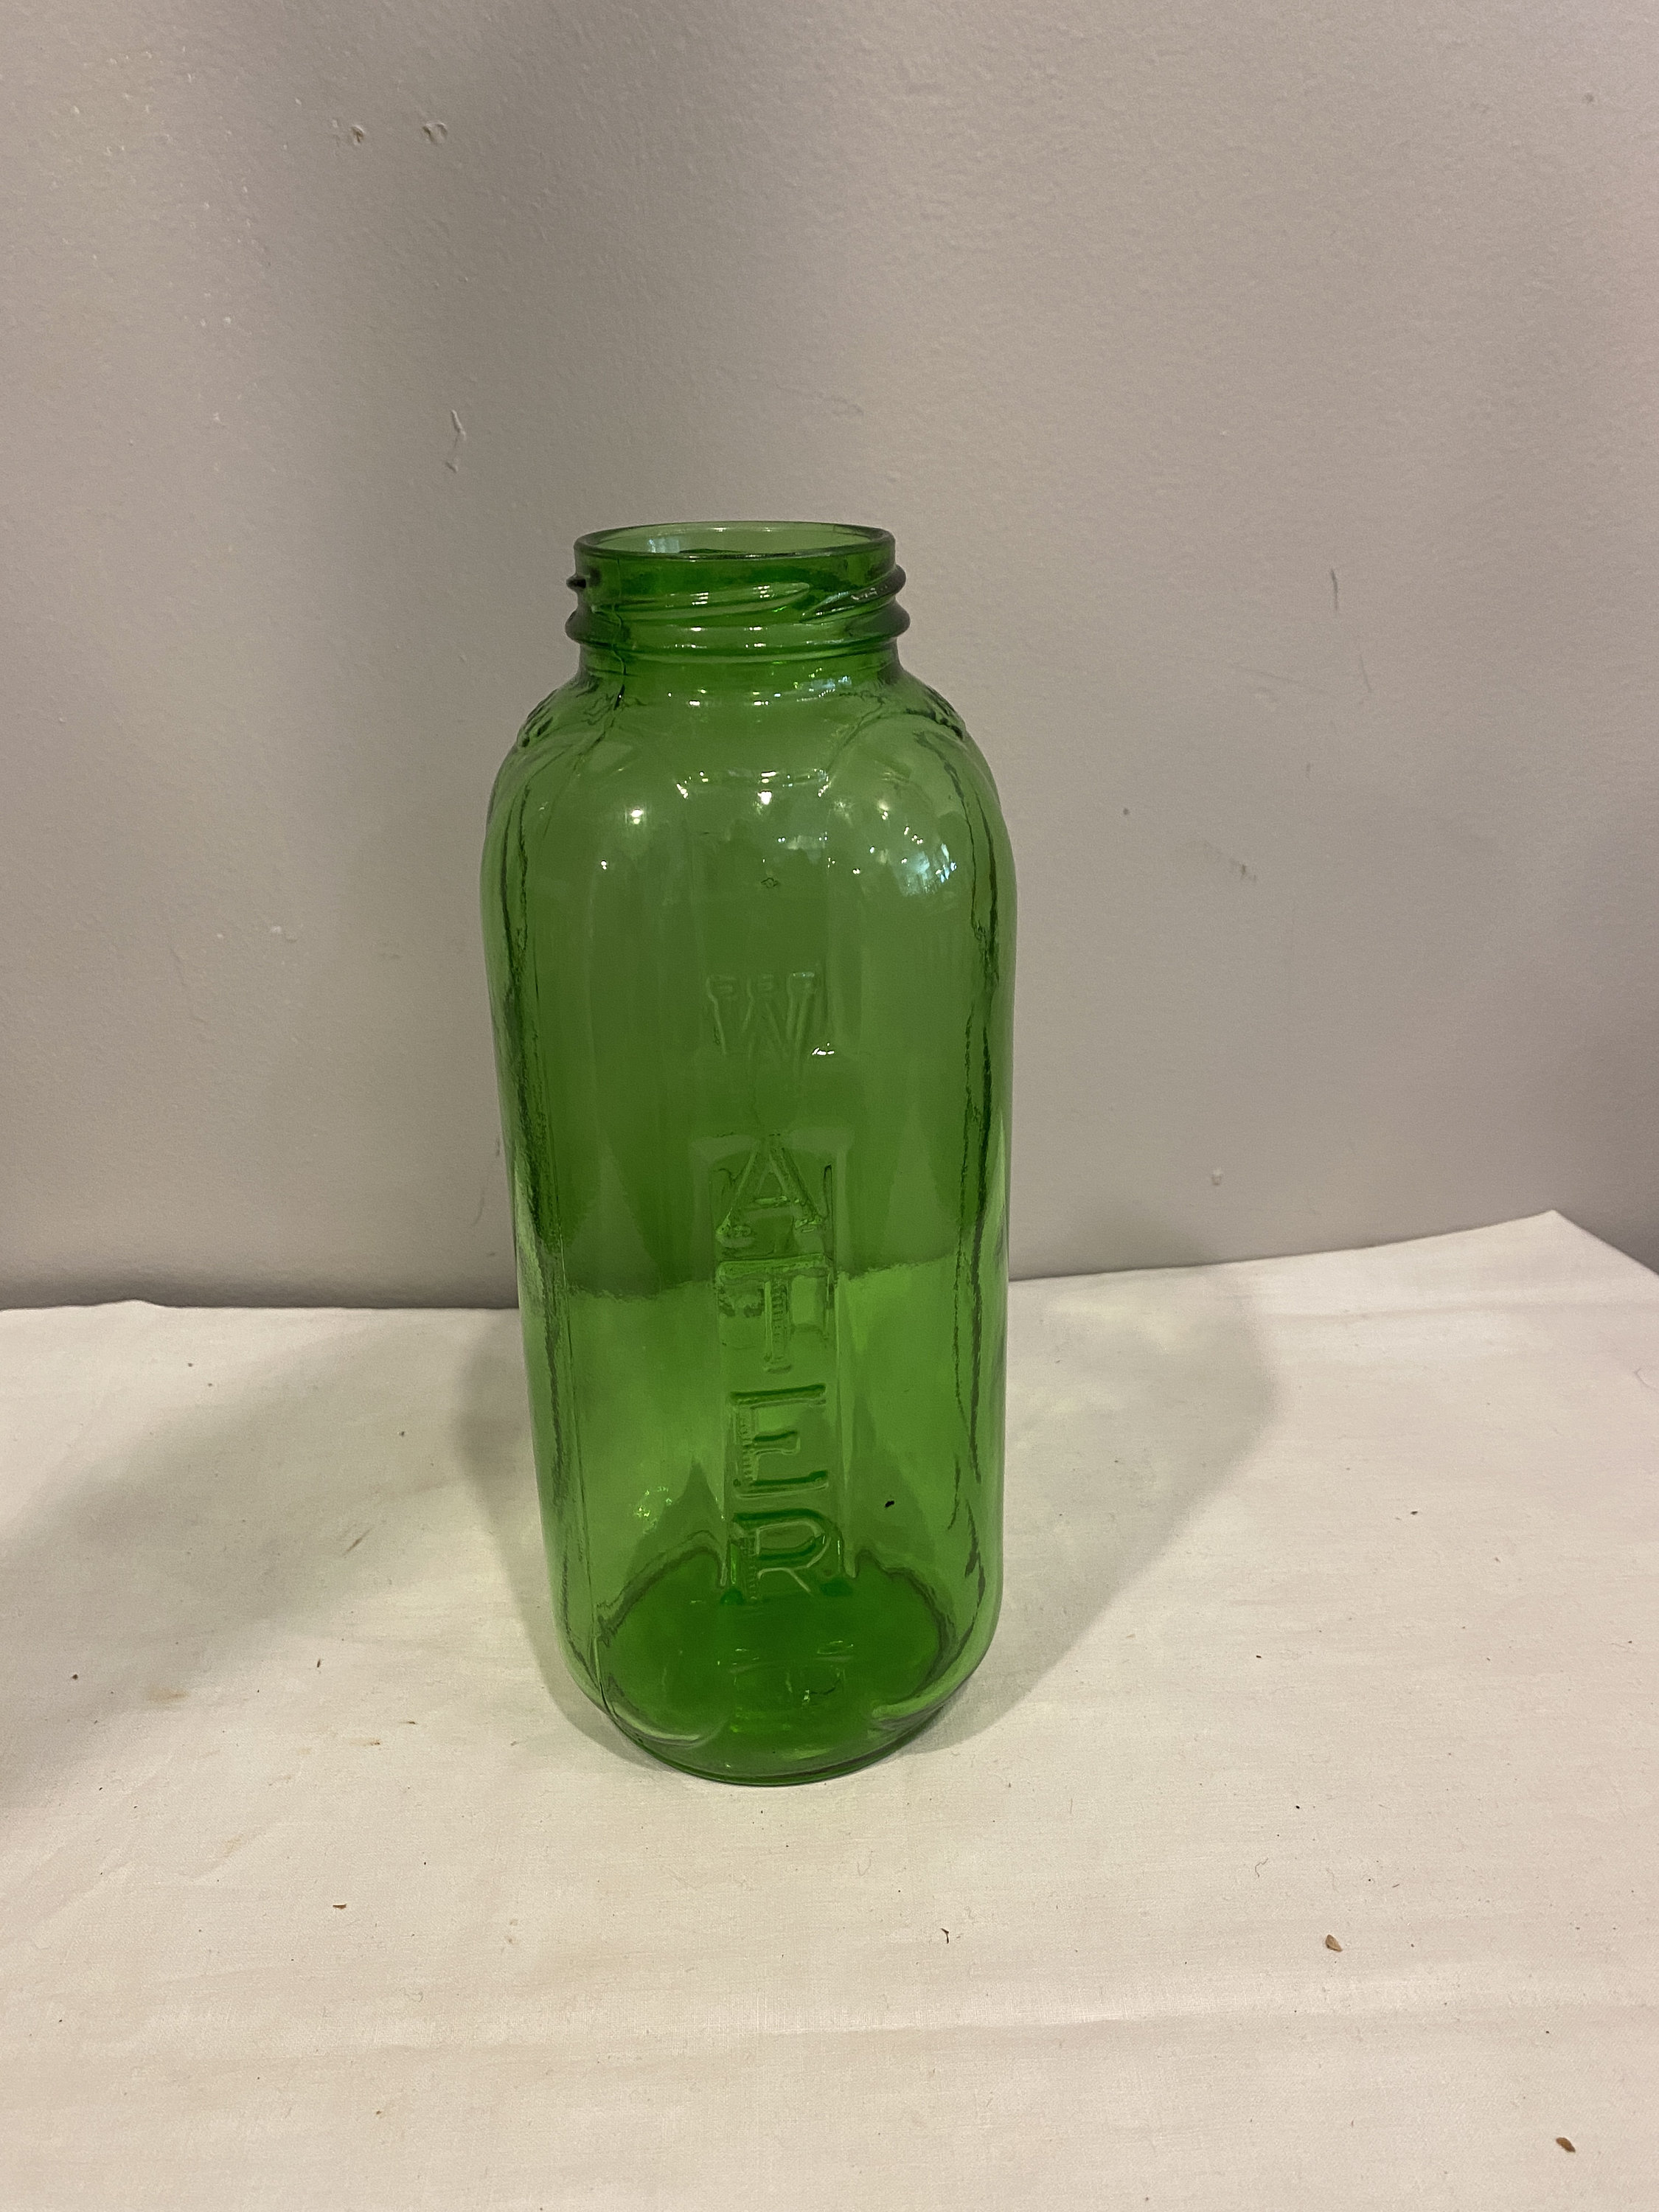 Vintage 1920s Clear Glass Refrigerator Water Bottle Pebble Design Patented  in Center Blue Metal Screw Cap Narrow/flat Kitchen Home Decor 